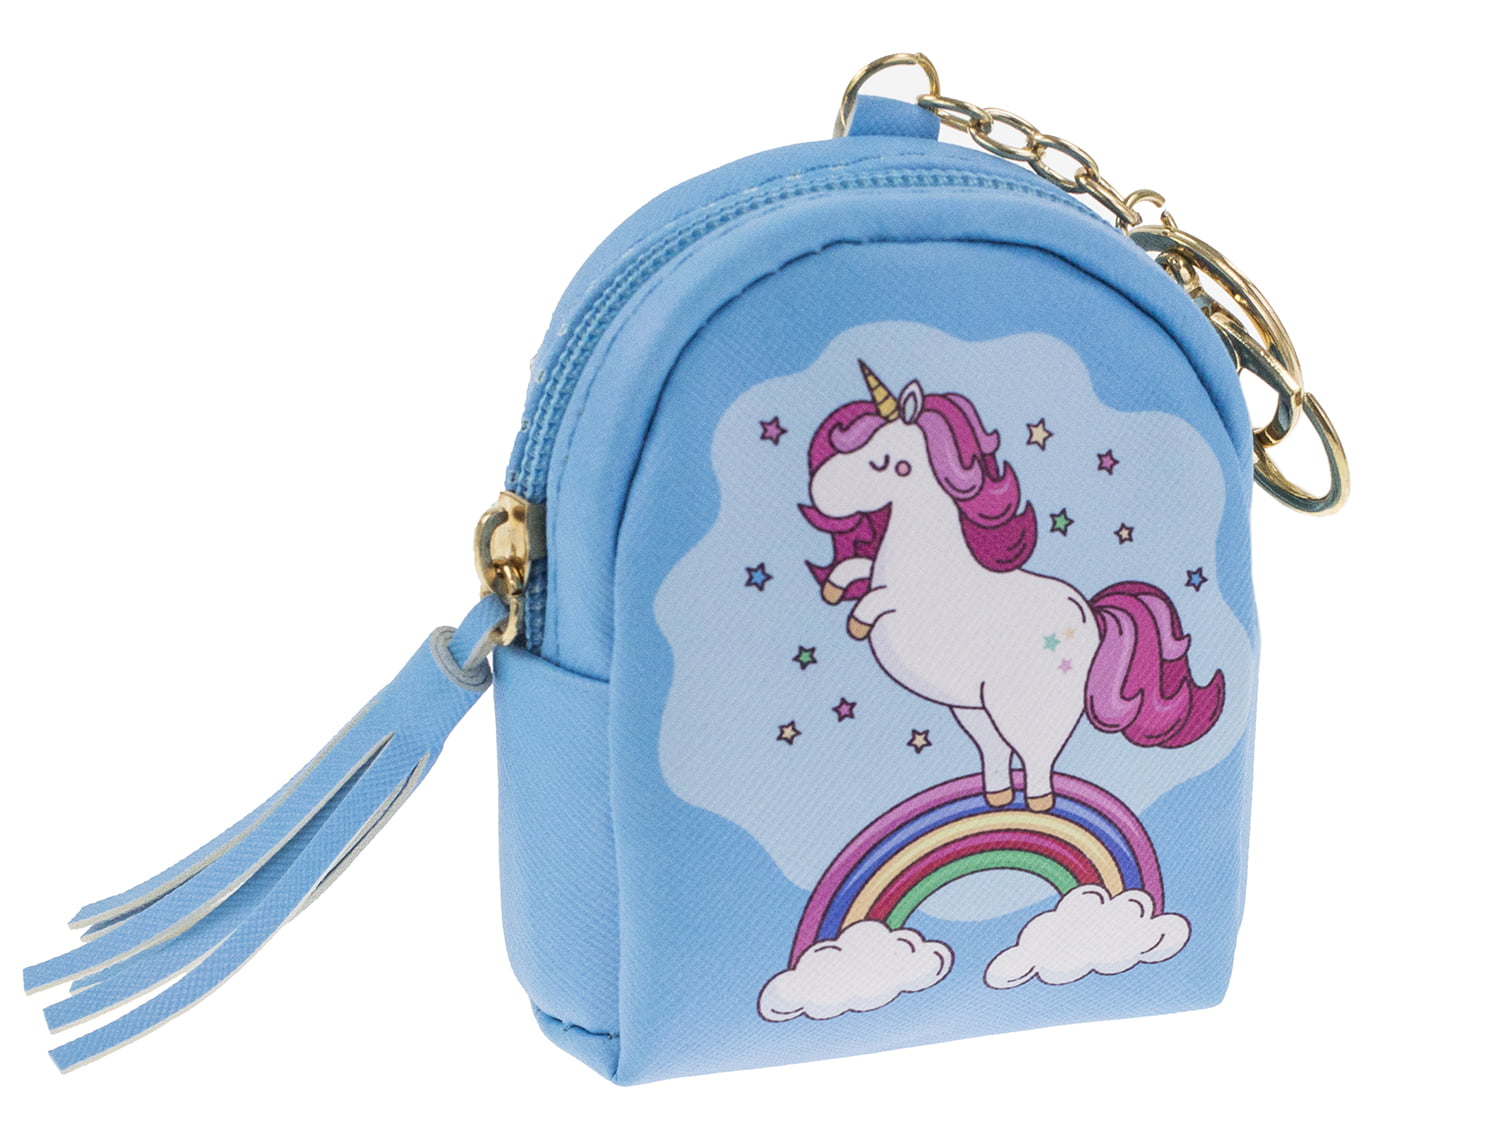 Maple Memories Snow Unicorn Animal Portable Canvas Coin Purse Change Purse Pouch Mini Wallet Gifts For Women Girls